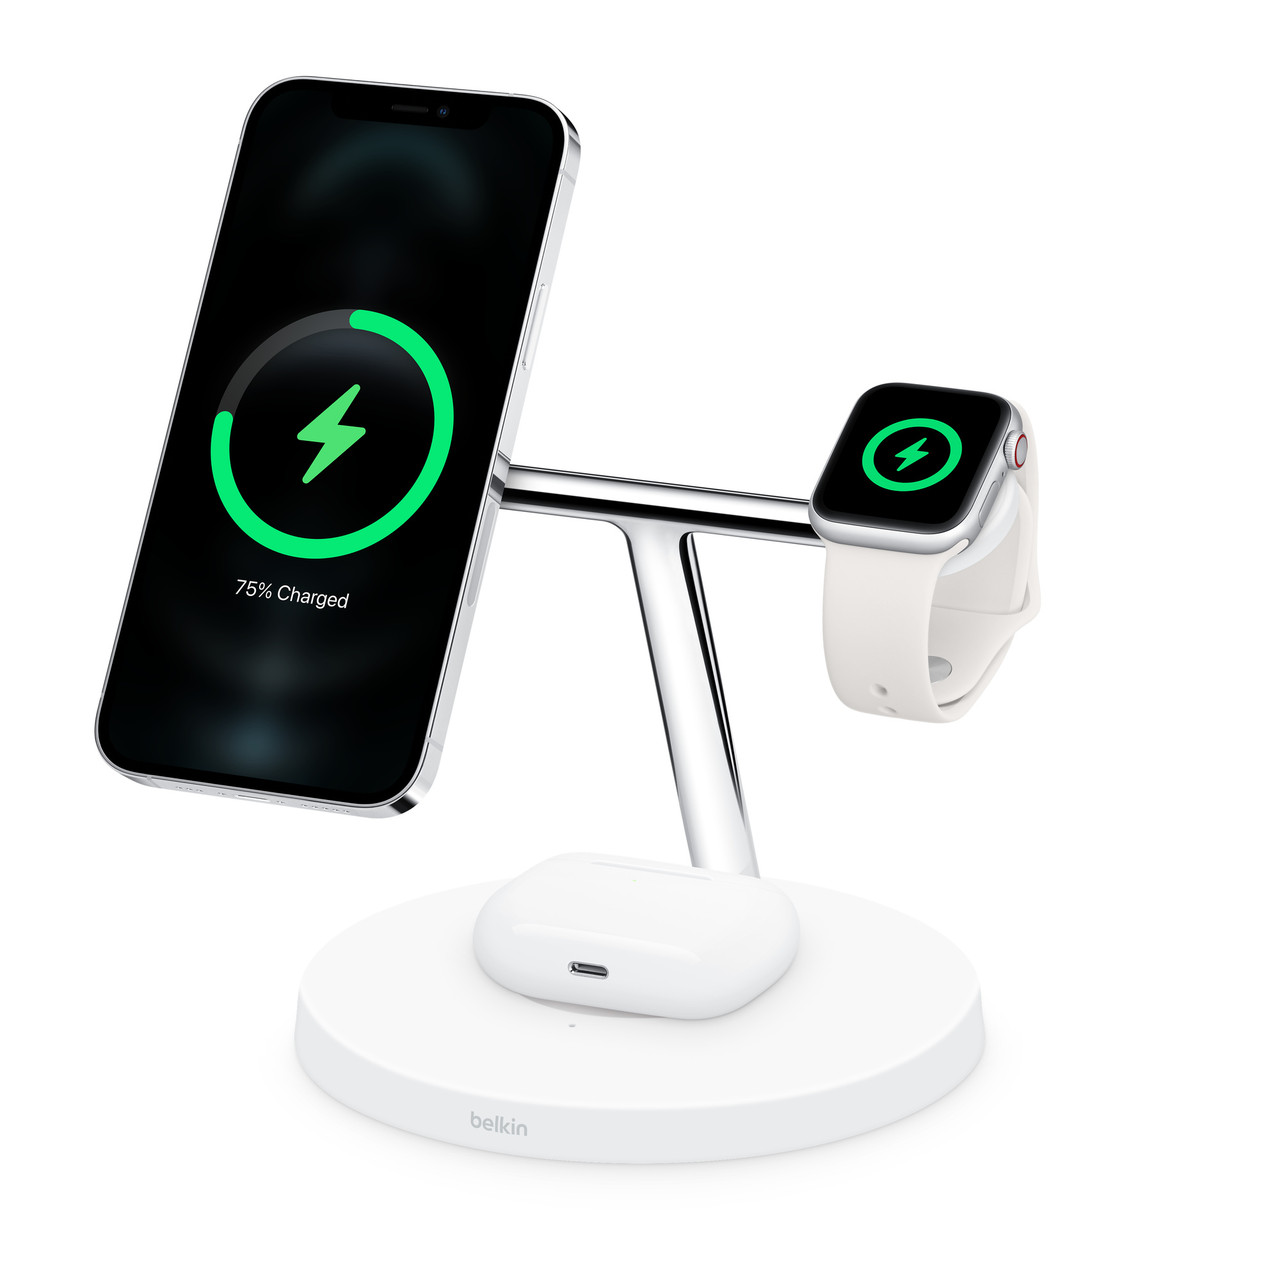 Зарядная док-станция Belkin BOOST CHARGE PRO 3-in-1 Wireless Charger with MagSafe, White (WIZ009ttWH-APL) - фото 1 - id-p1459226163